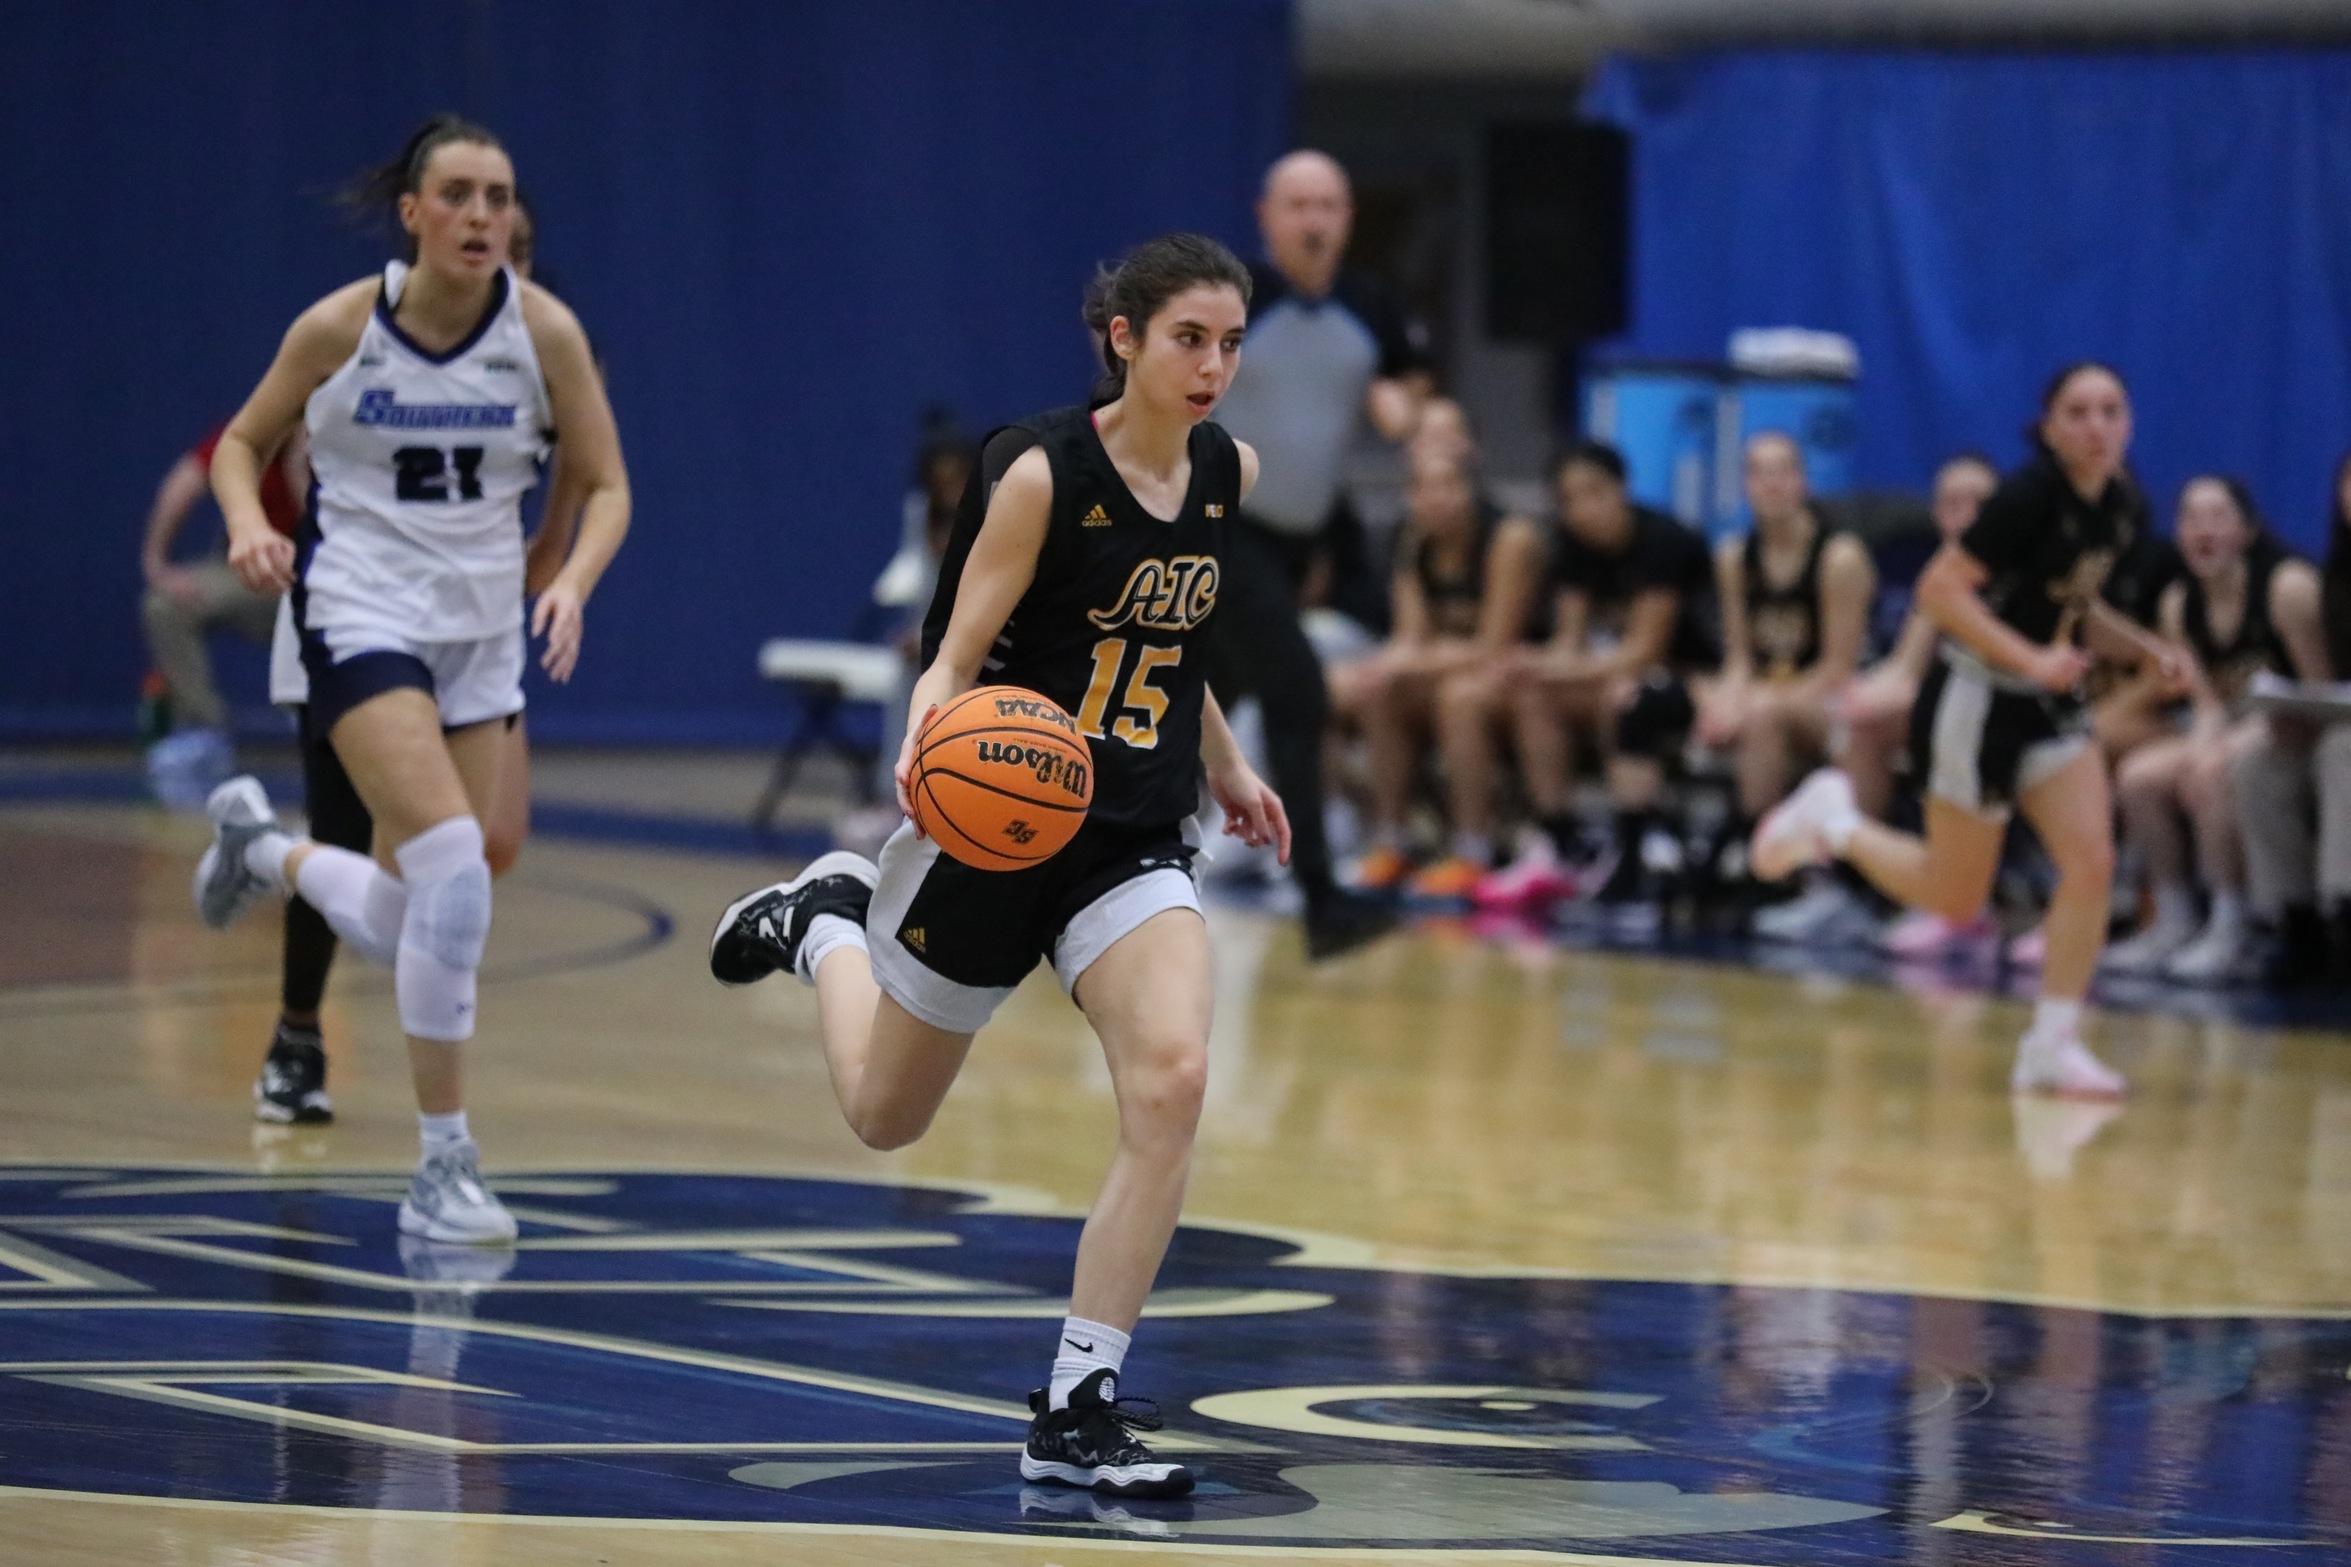 Four reach double figures, but Women's Basketball falls at SCSU